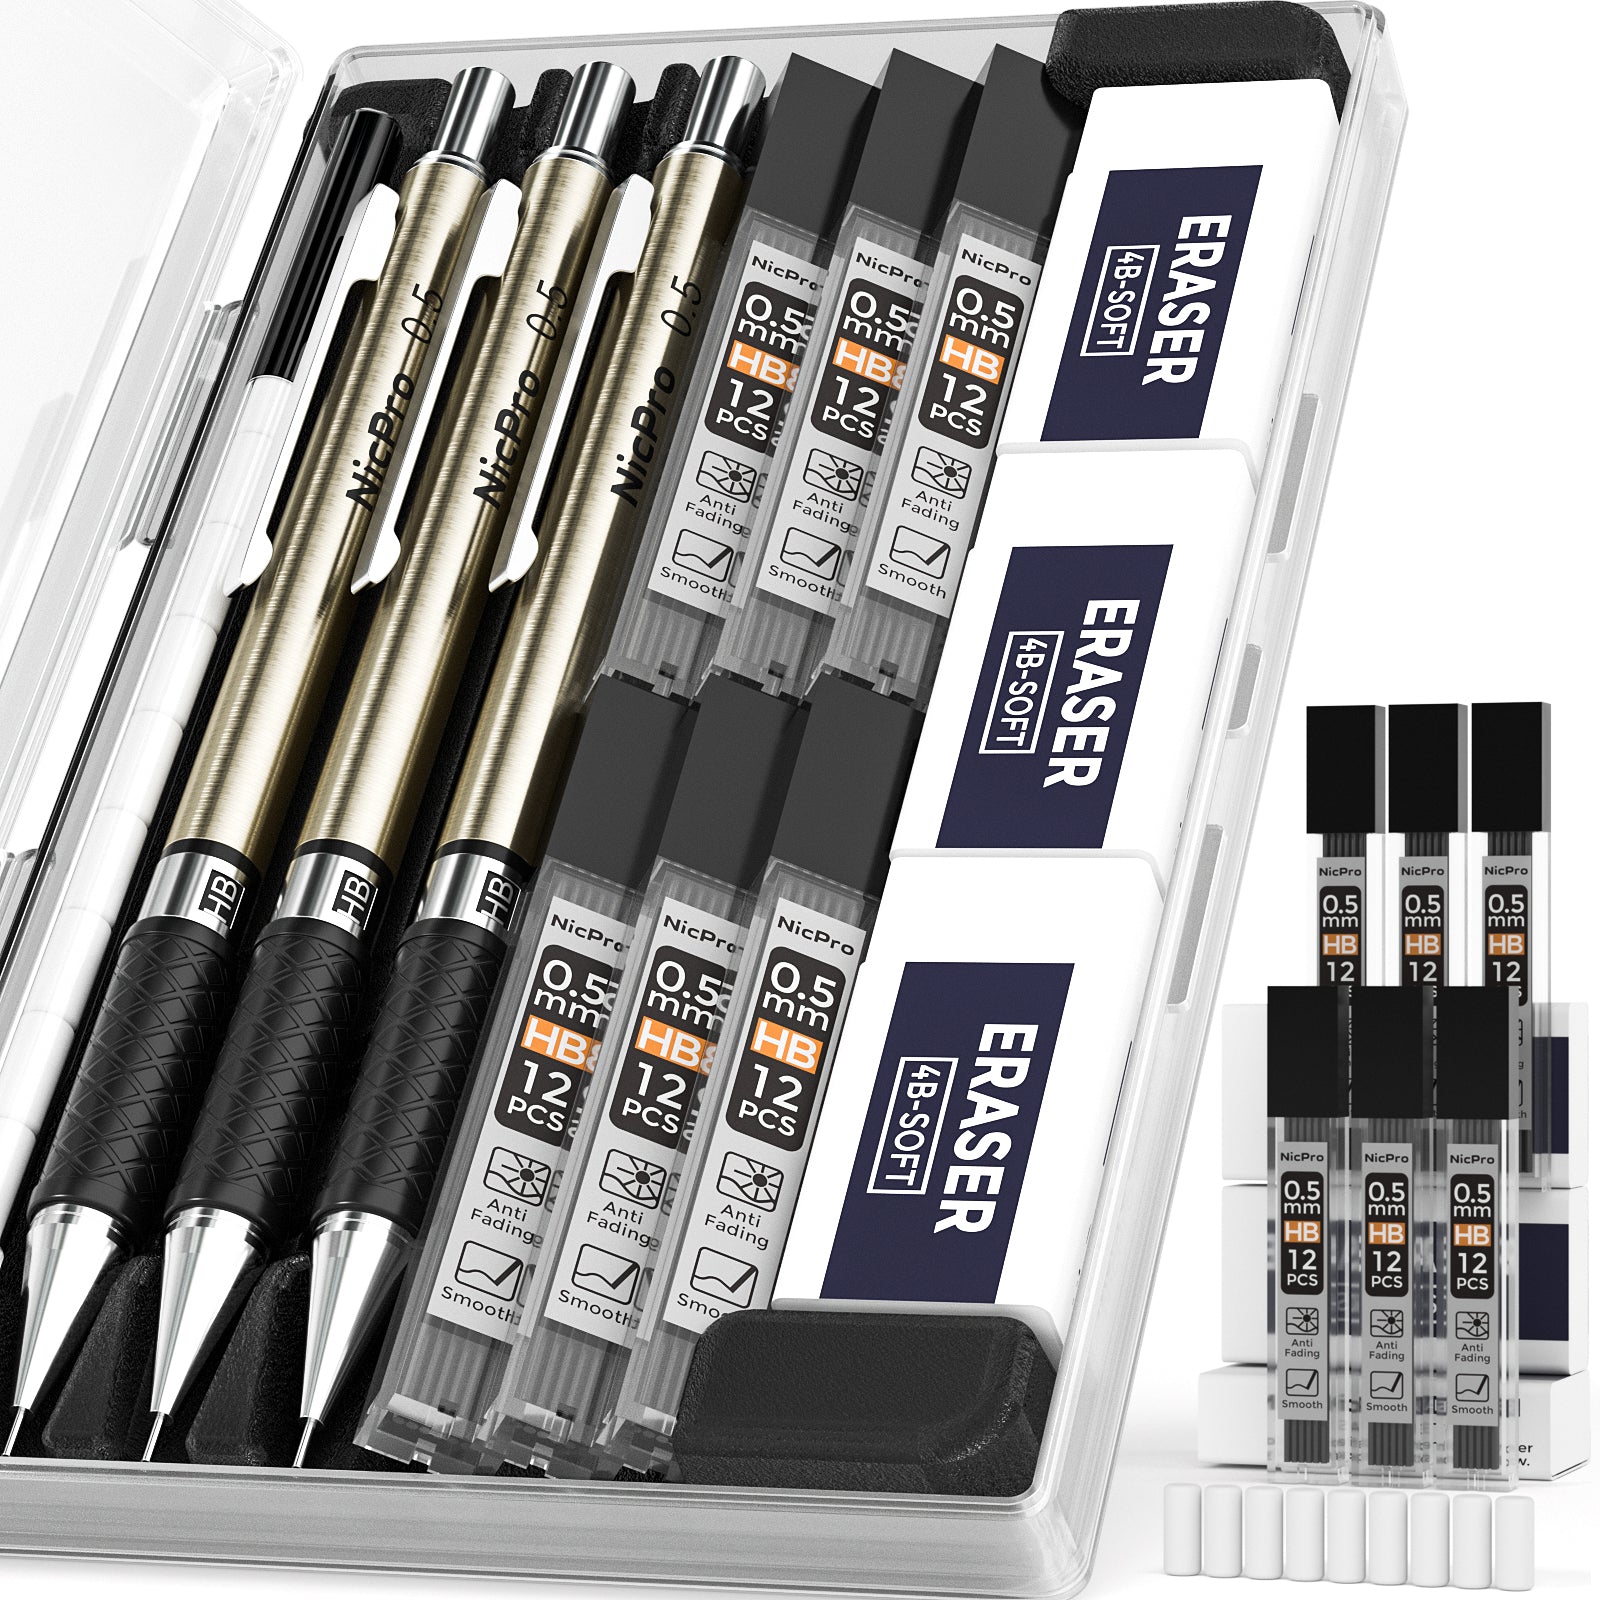 Nicpro 0.5 mm Art Mechanical Pencils Set in Storage Case, 3 PCS Metal  Drafting Pencil Lead Pencil with 6 Tube HB Lead Refills, 3 Erasers, 9 PCS  Eraser